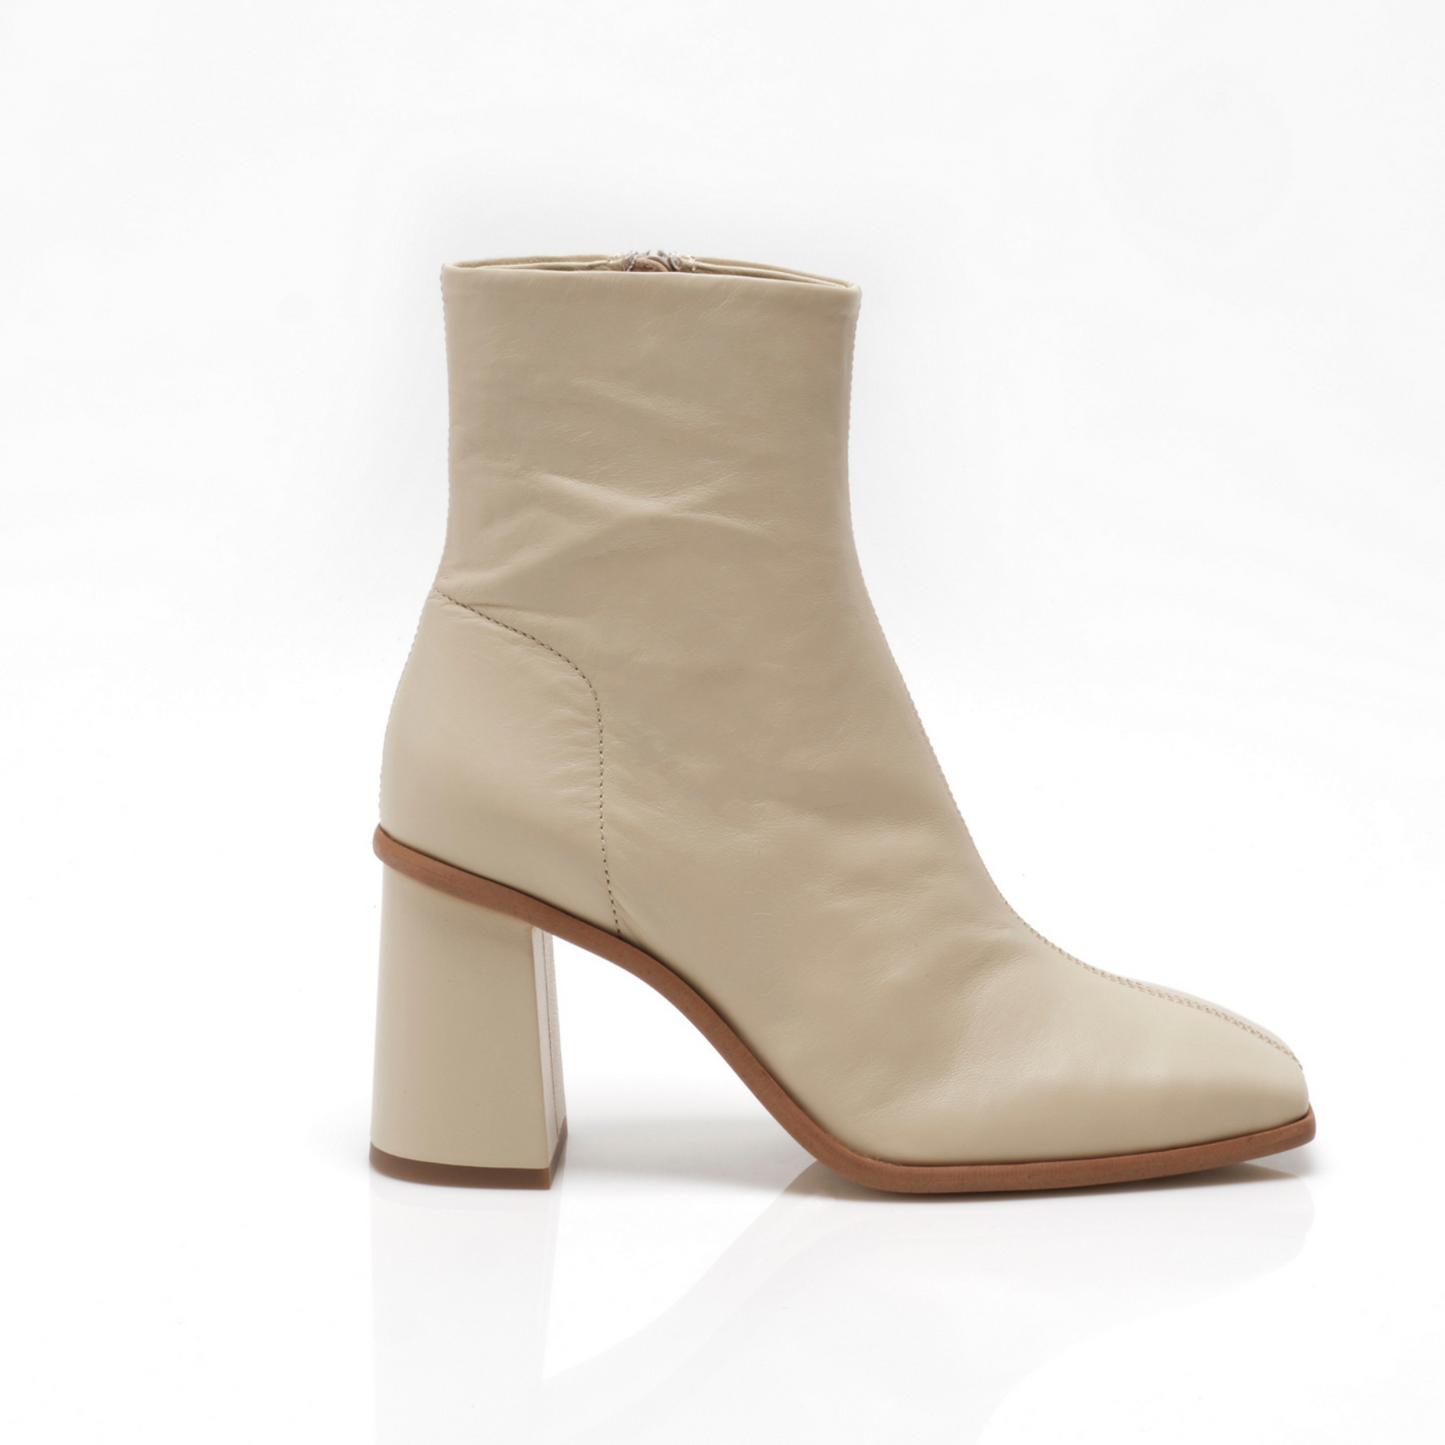 Free People Sienna Ankle Boot - Buttercream